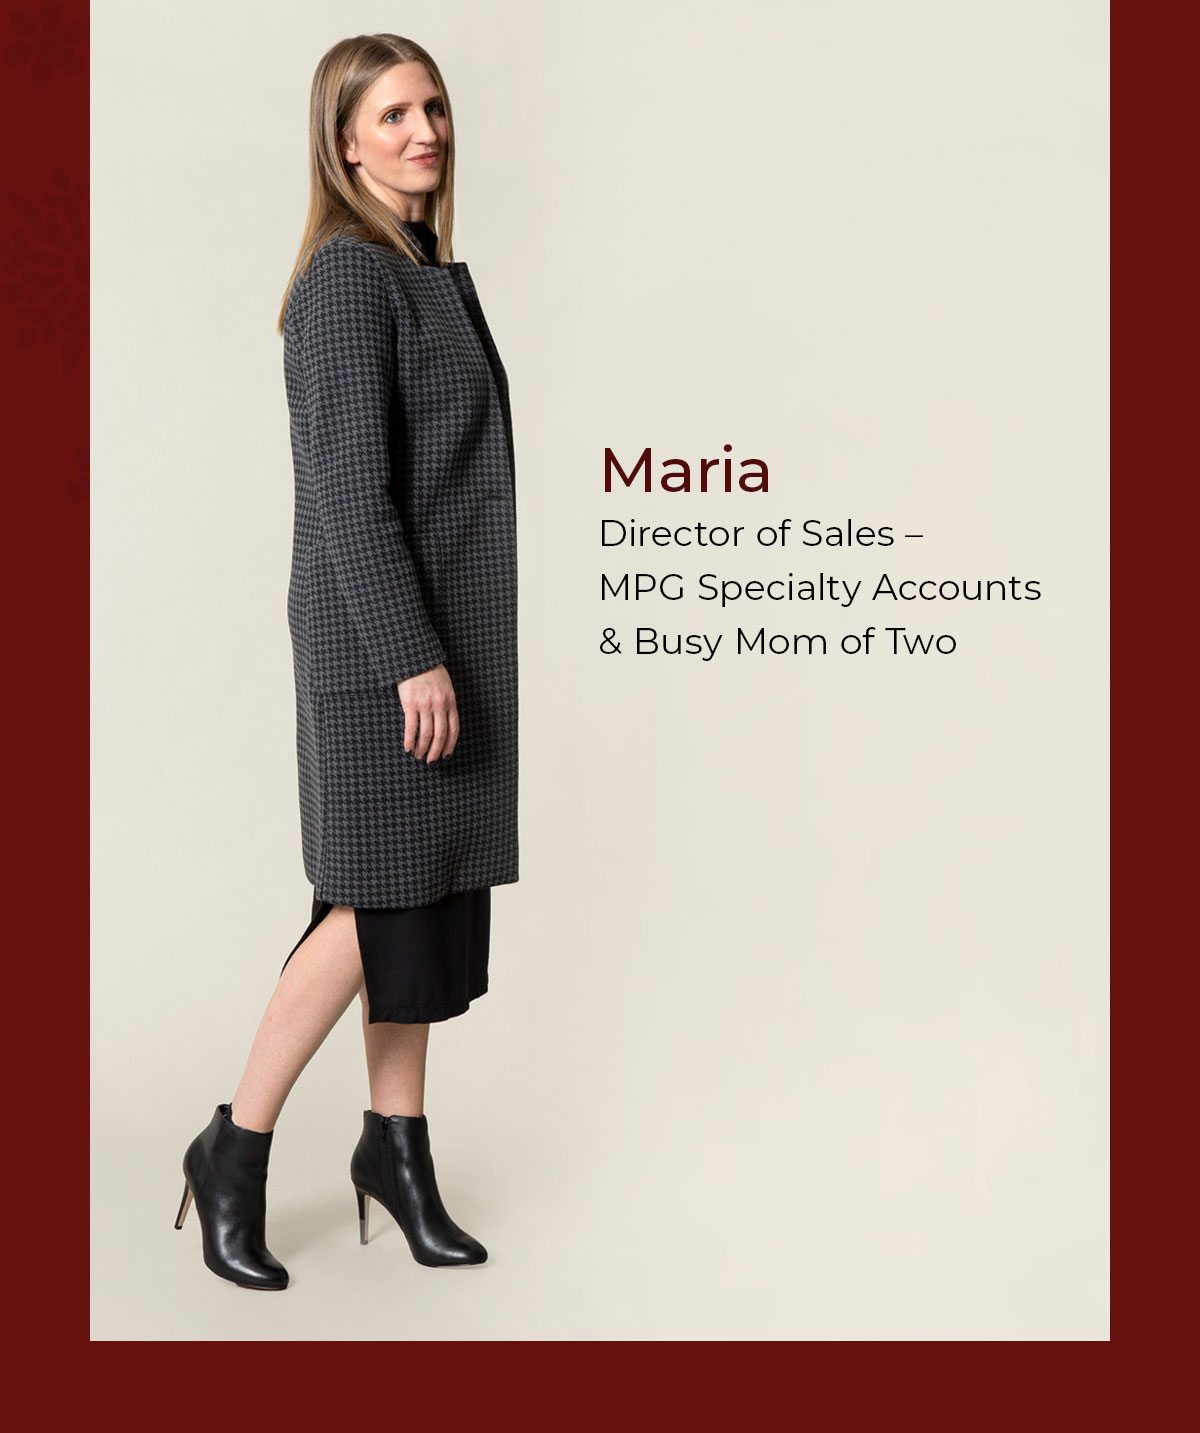 Featuring Maria - Director of Sales - MPG Specialty Accounts and Busy Mom of Two